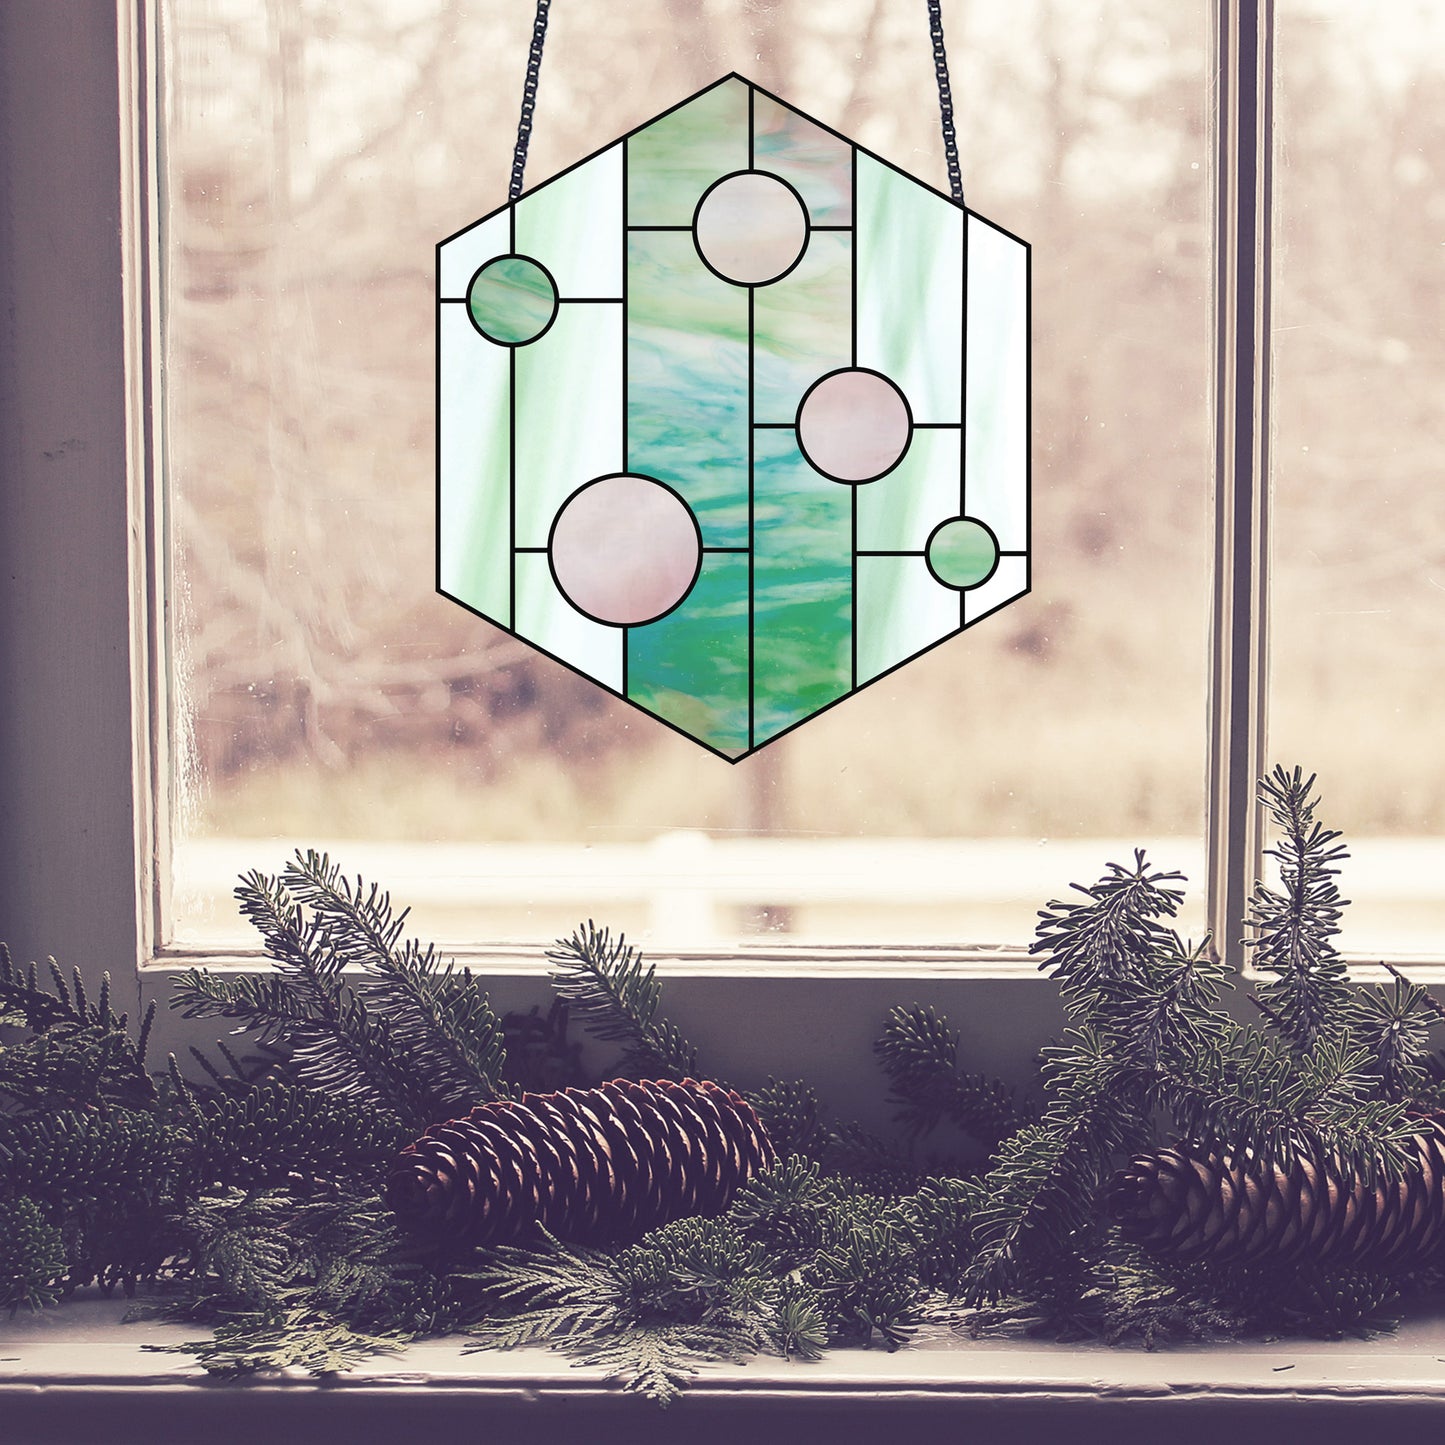 Hexagon geometric stained glass pattern, instant pdf download, shown in window with pine cones